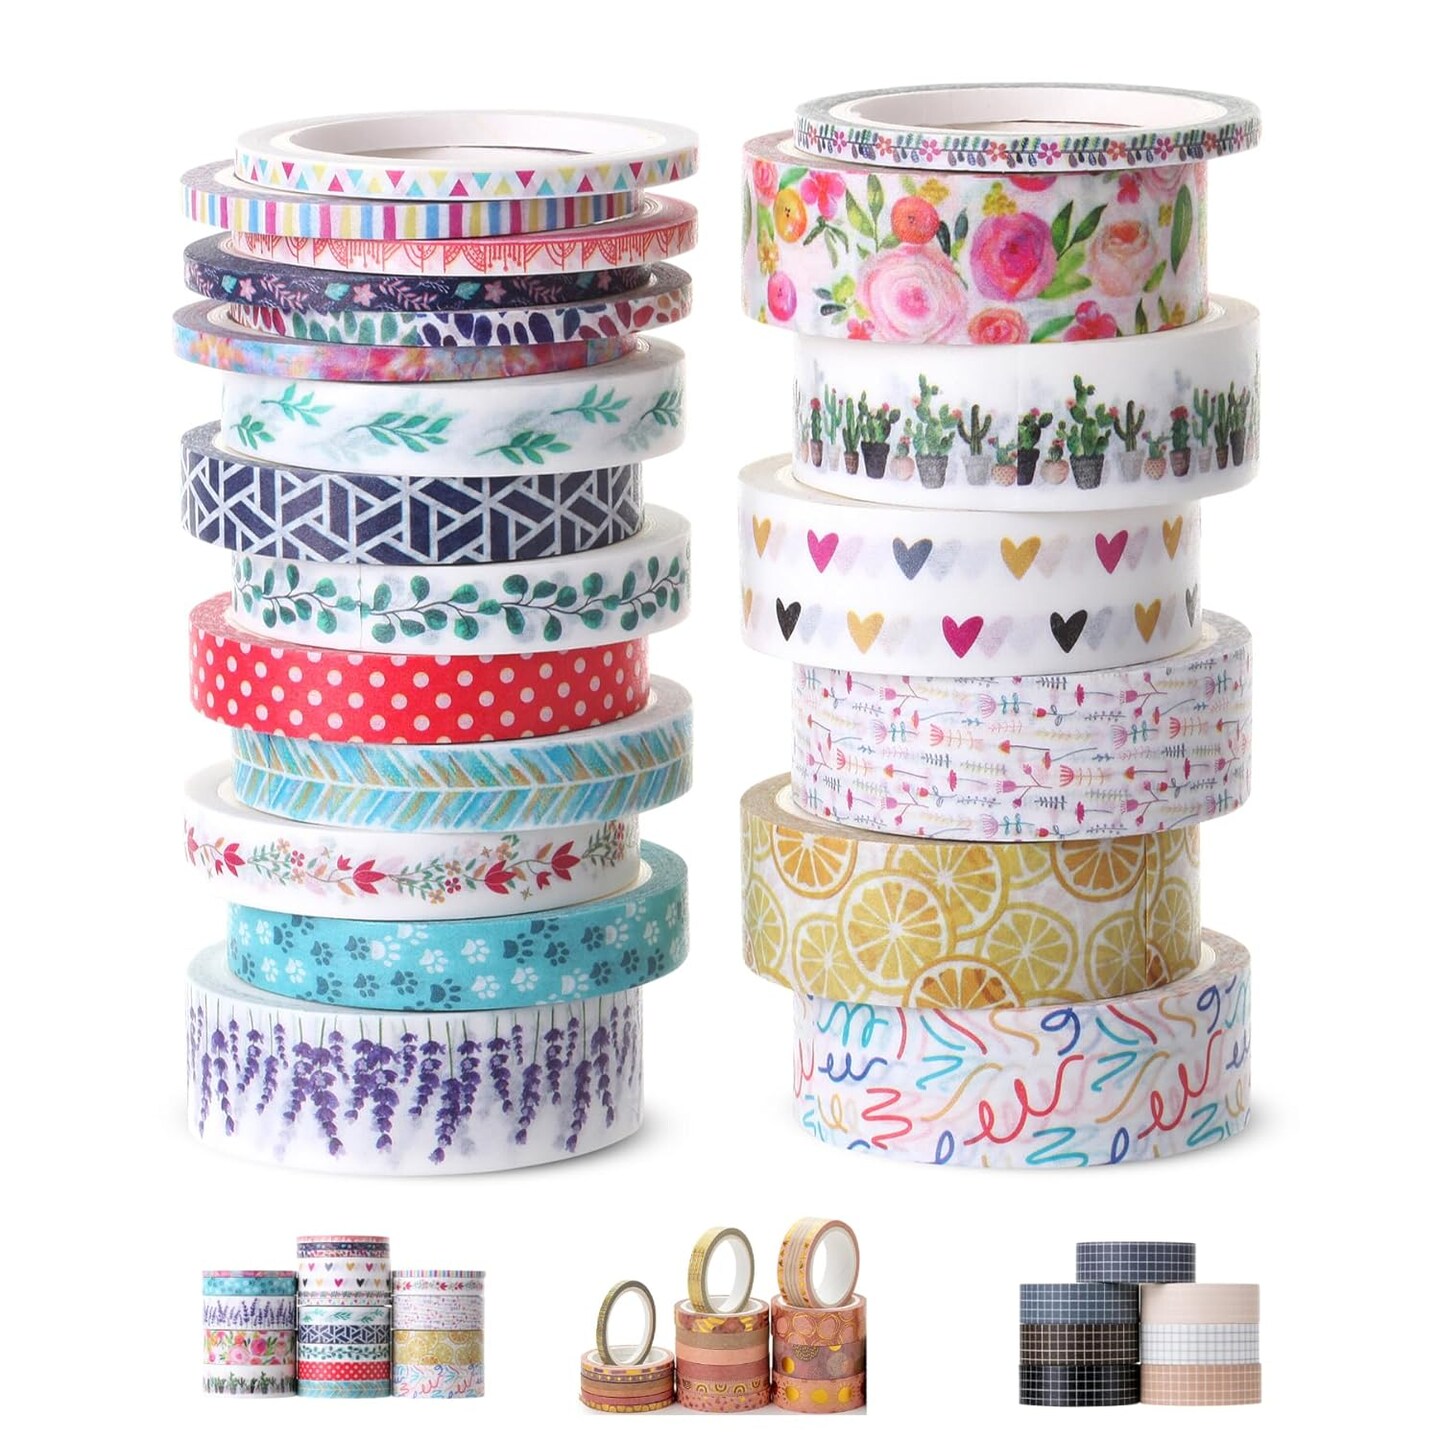 Washi Tape Set, 21 Rolls, Decorative Cute Floral Washi Tape for Bible Journaling, Bullet Journal Supplies